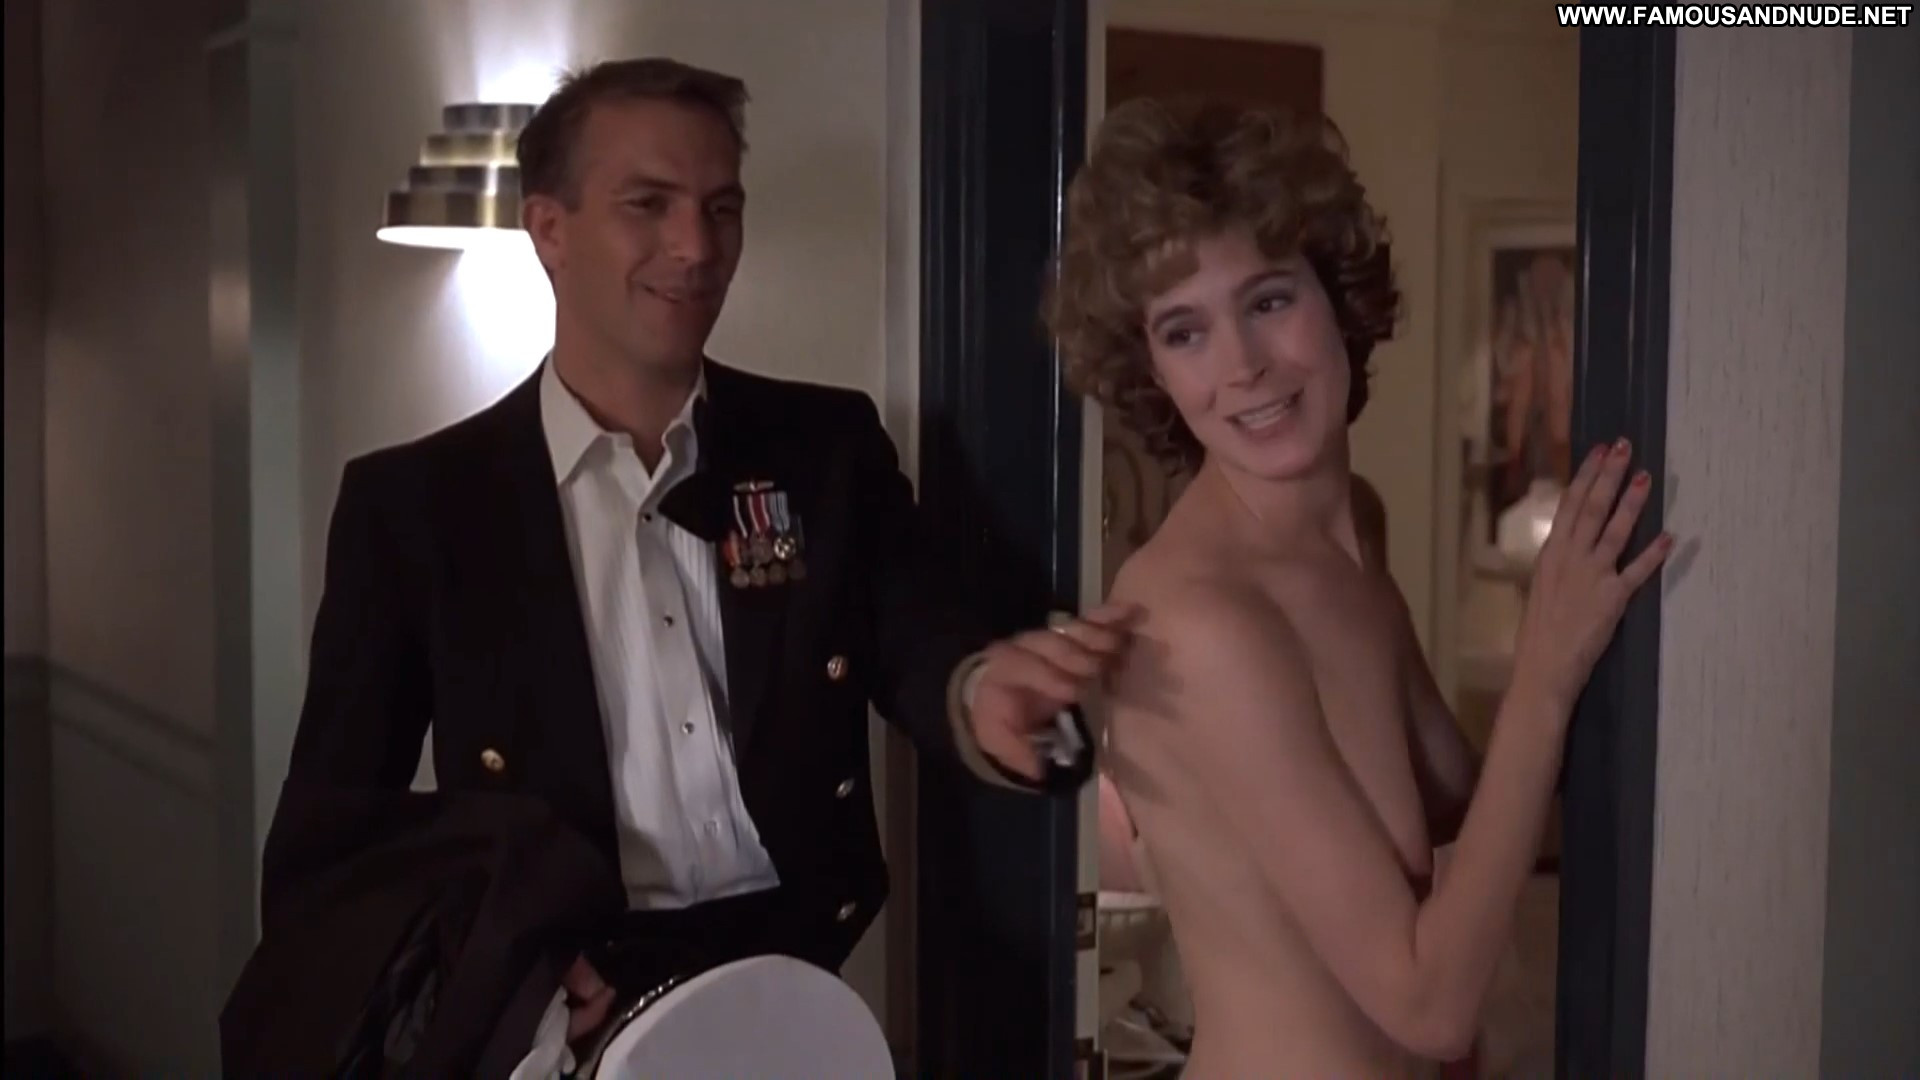 No Way Out Sean Young Hd Posing Hot Beautiful Topless Celebrity Babe Movie.